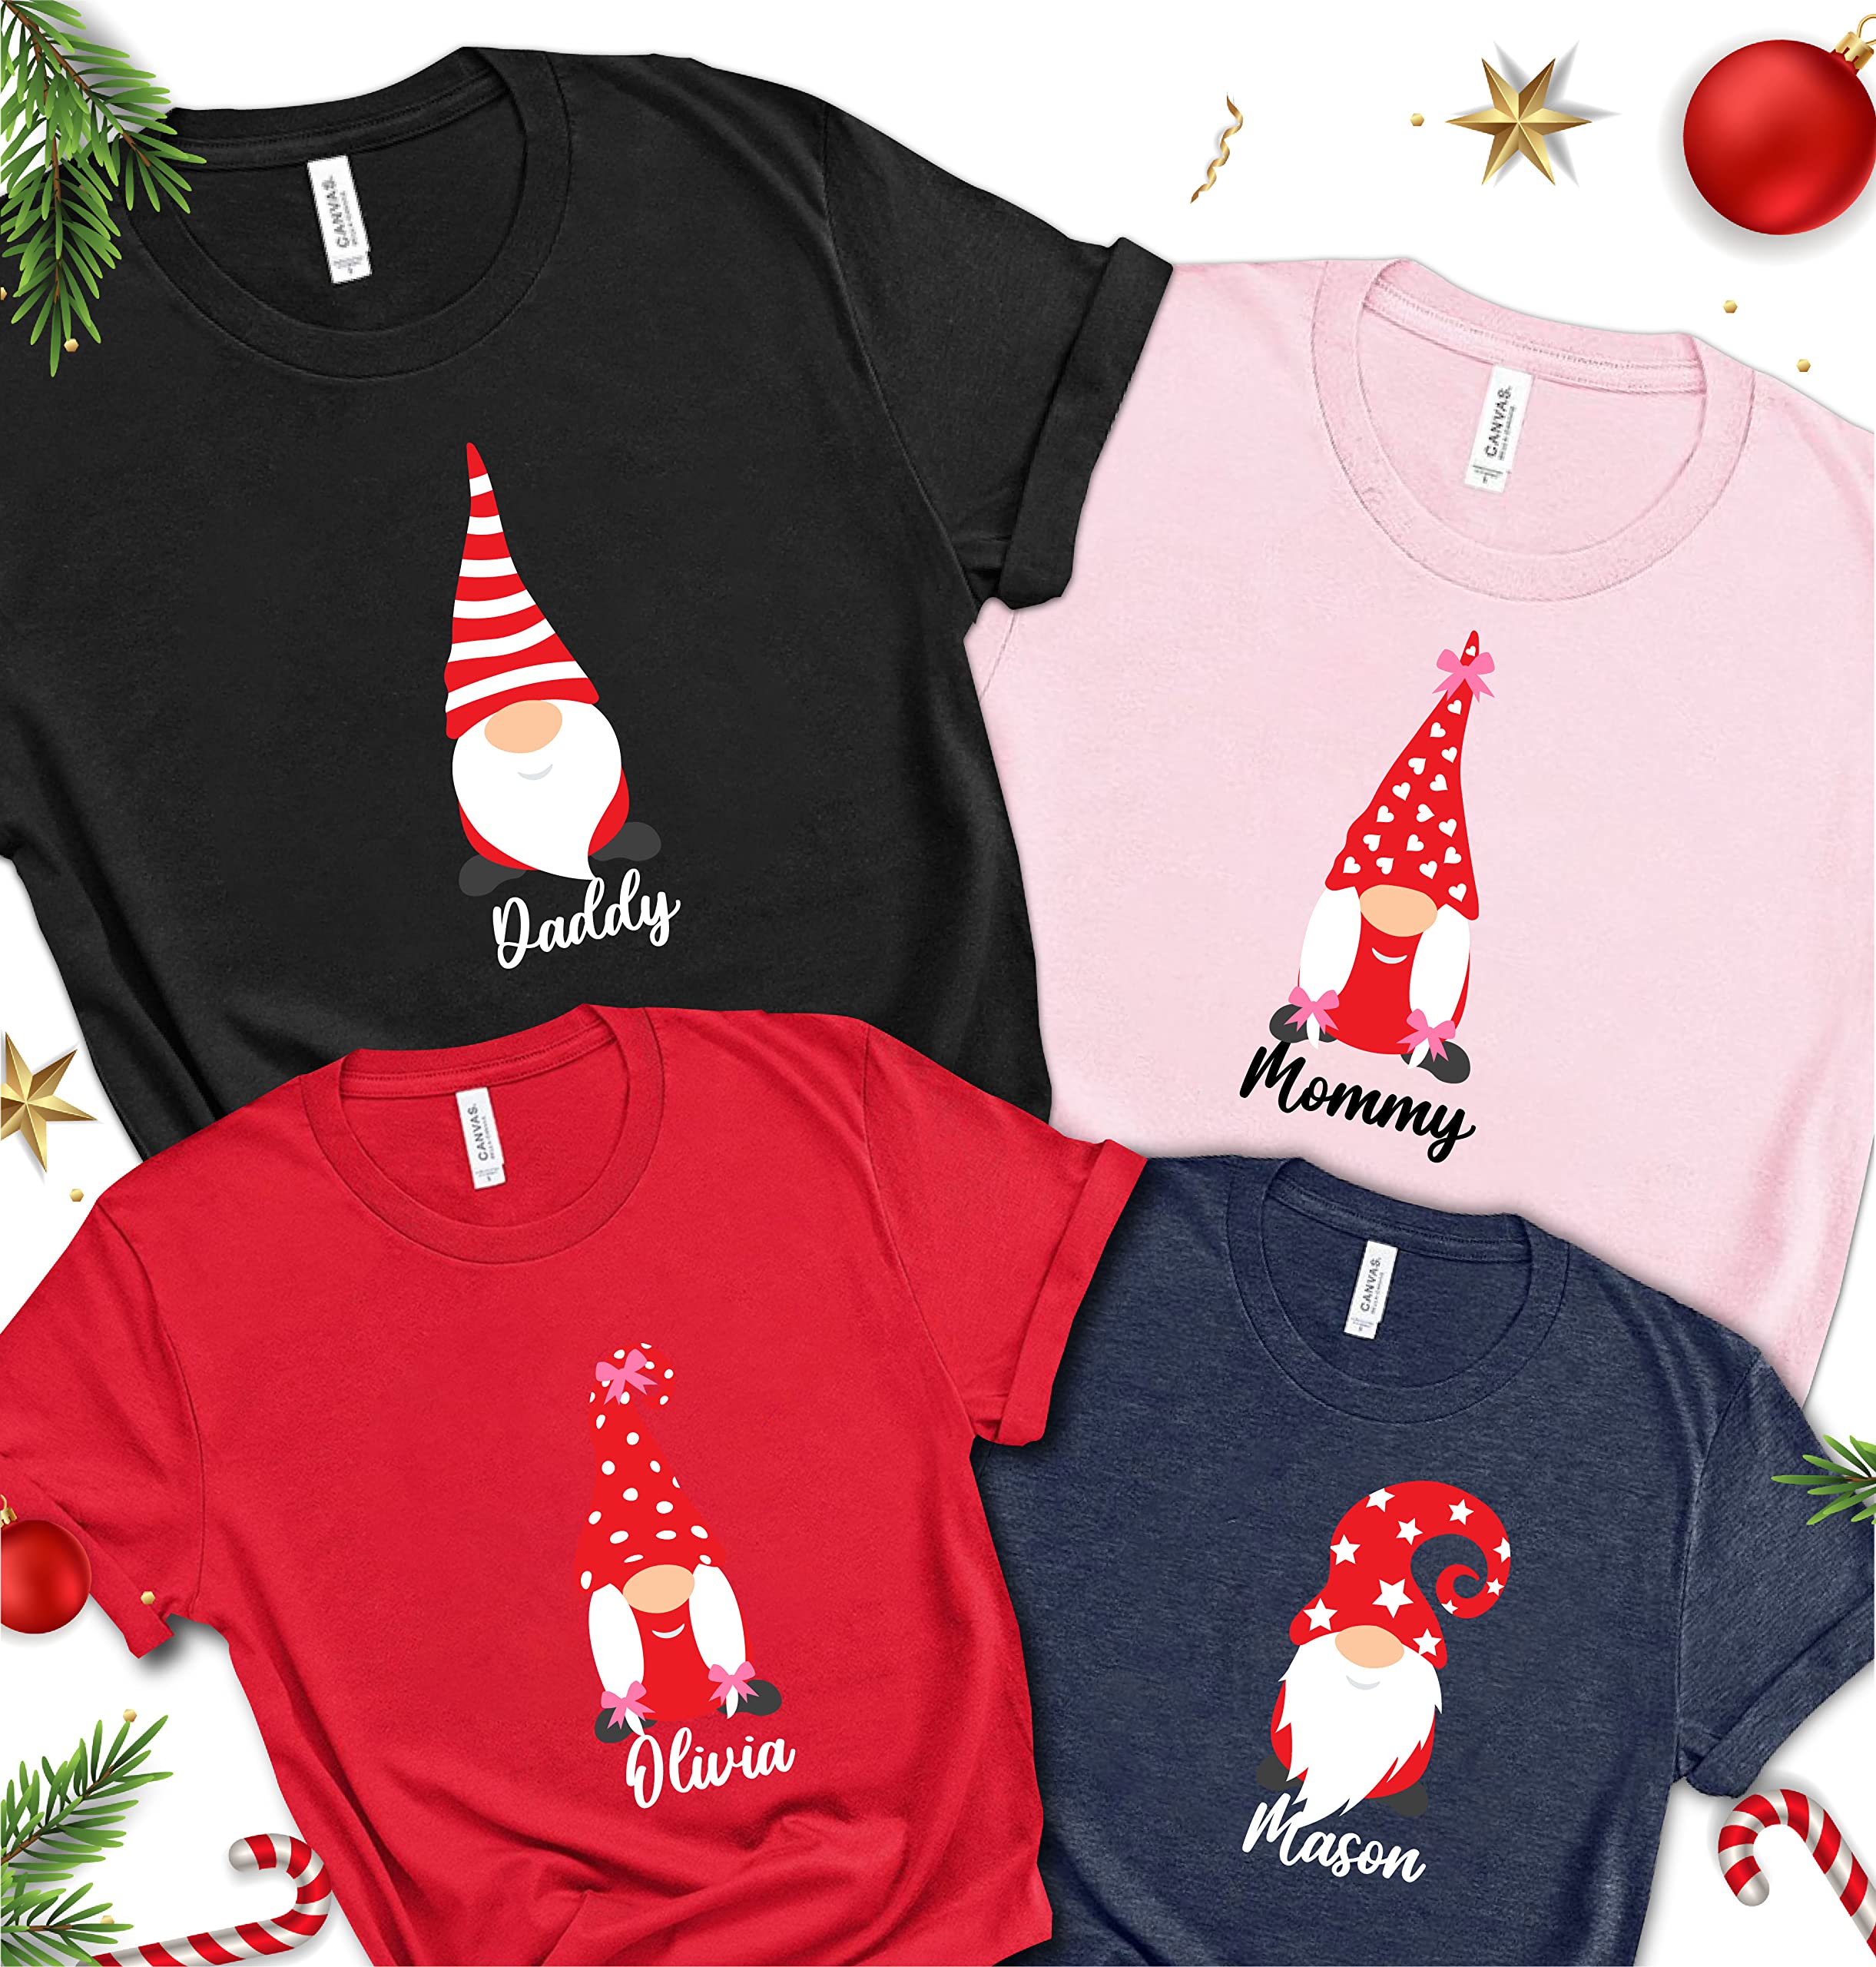 Personalized Christmas Family Gnomes T-Shirt For Family, Customized Merry Christmas Shirt, Custom Gnomes Tee, Funny Graphics Tee For Christmas, New Year Party T-Shirts, Customized Christmas Gnome Tee